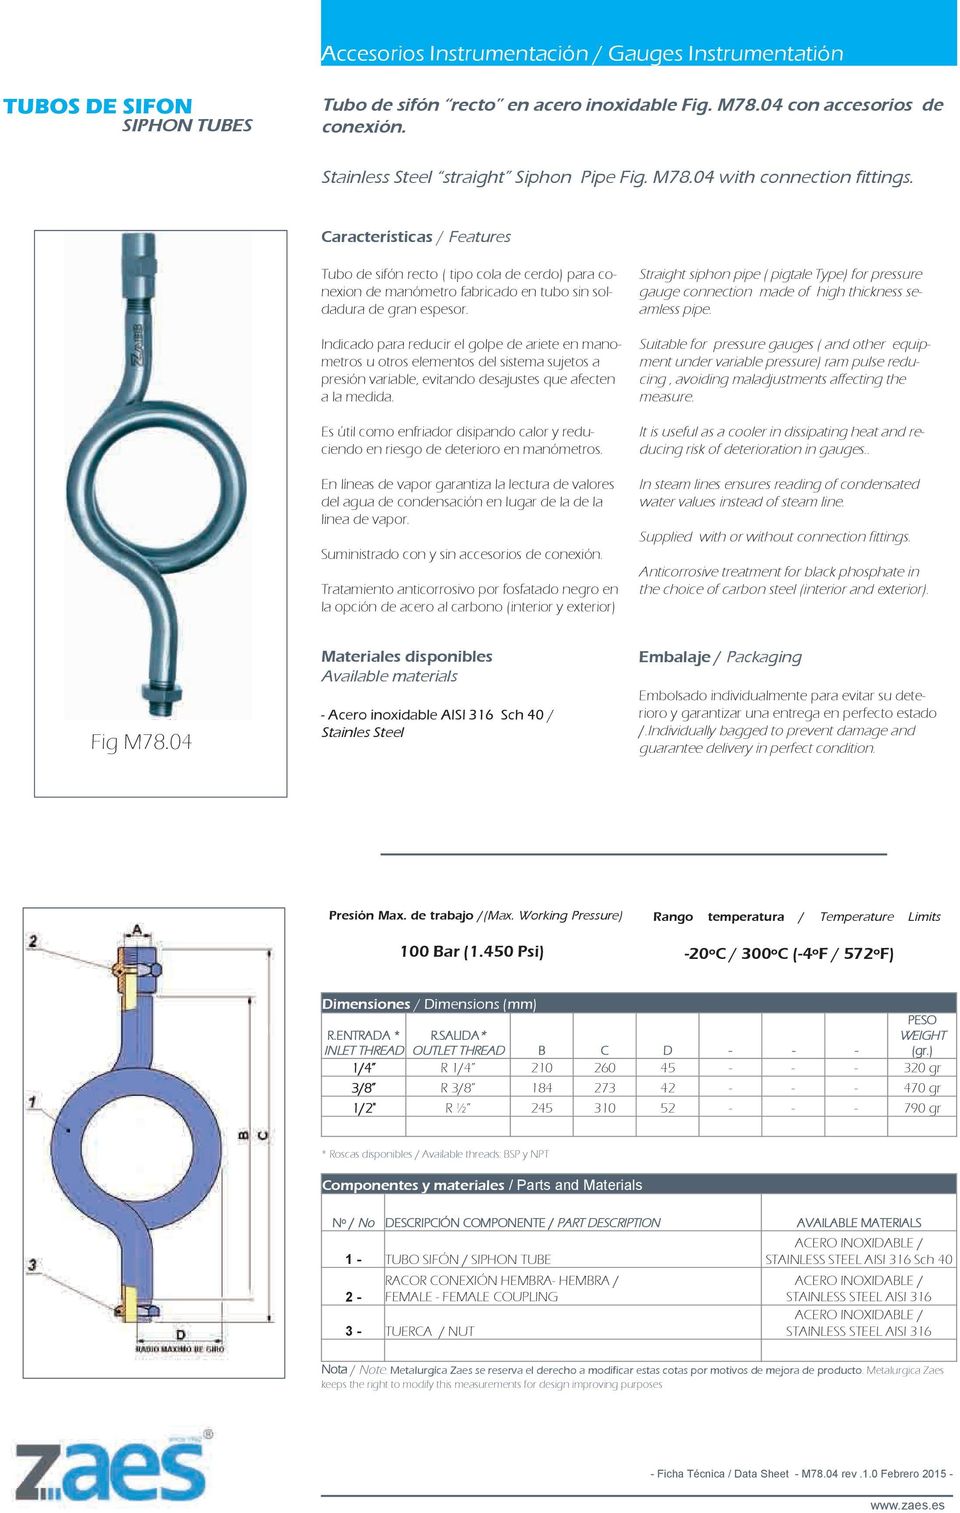 pressure gauge connection made of high thickness seamless pipe. Fig M78.